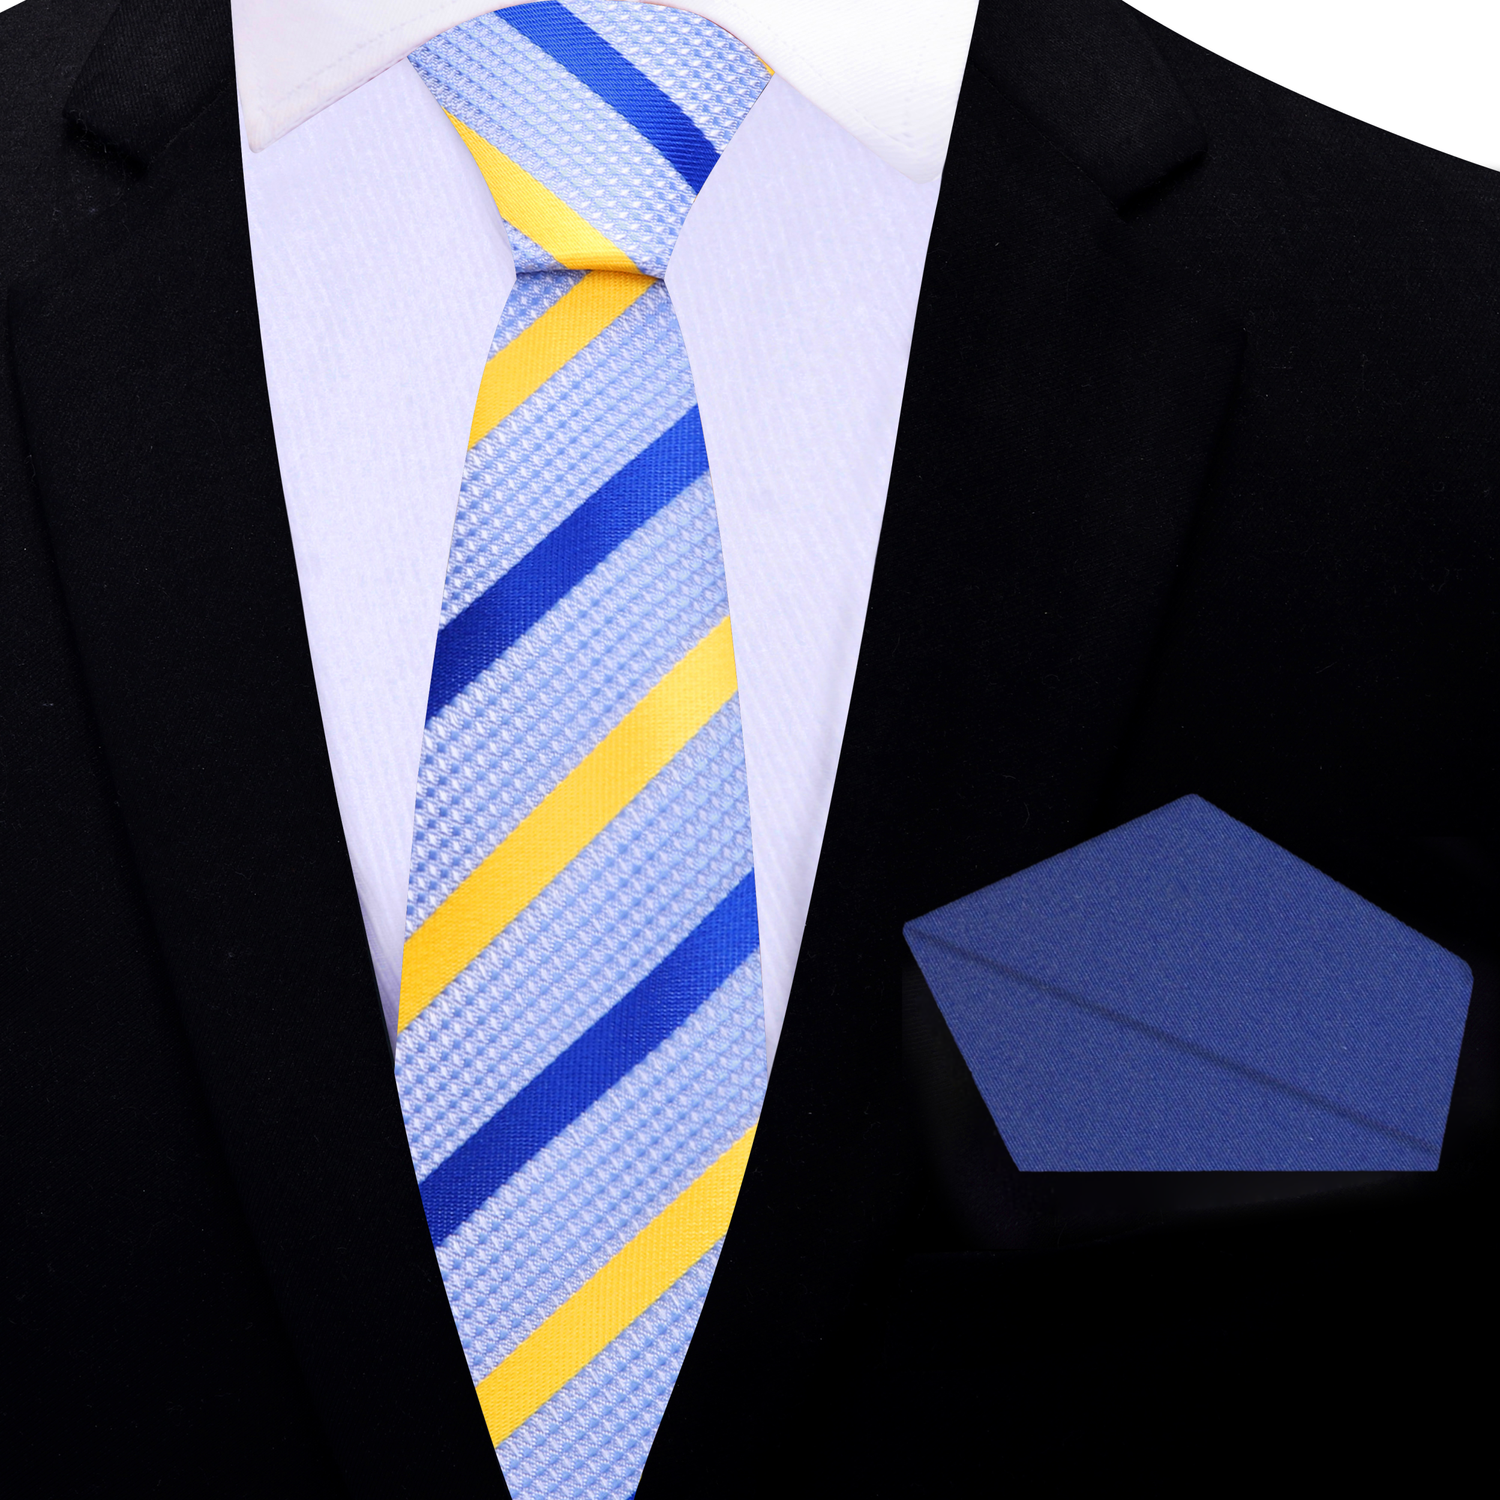 Thin Tie: Light Blue, Blue, Yellow Stripe Tie and Blue Square